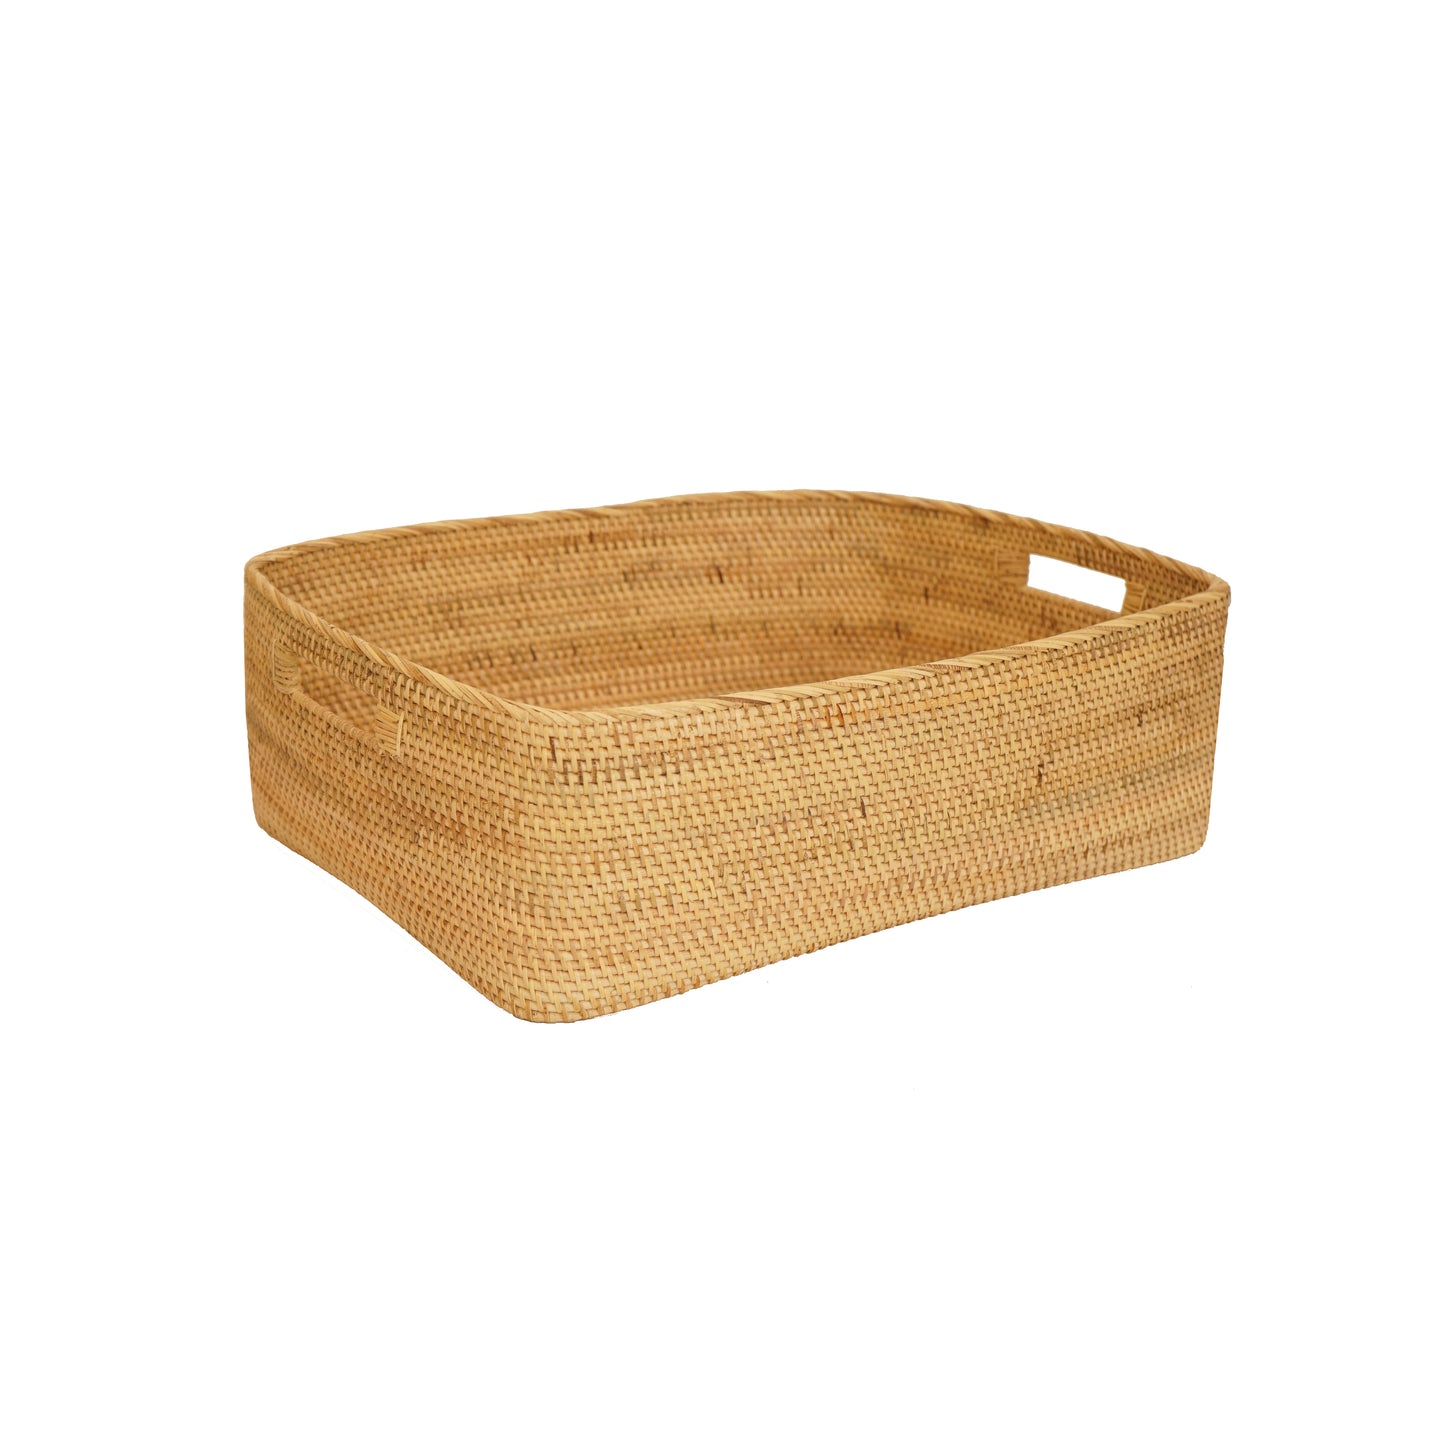 Rattan Container Hampers by Riani Rattan